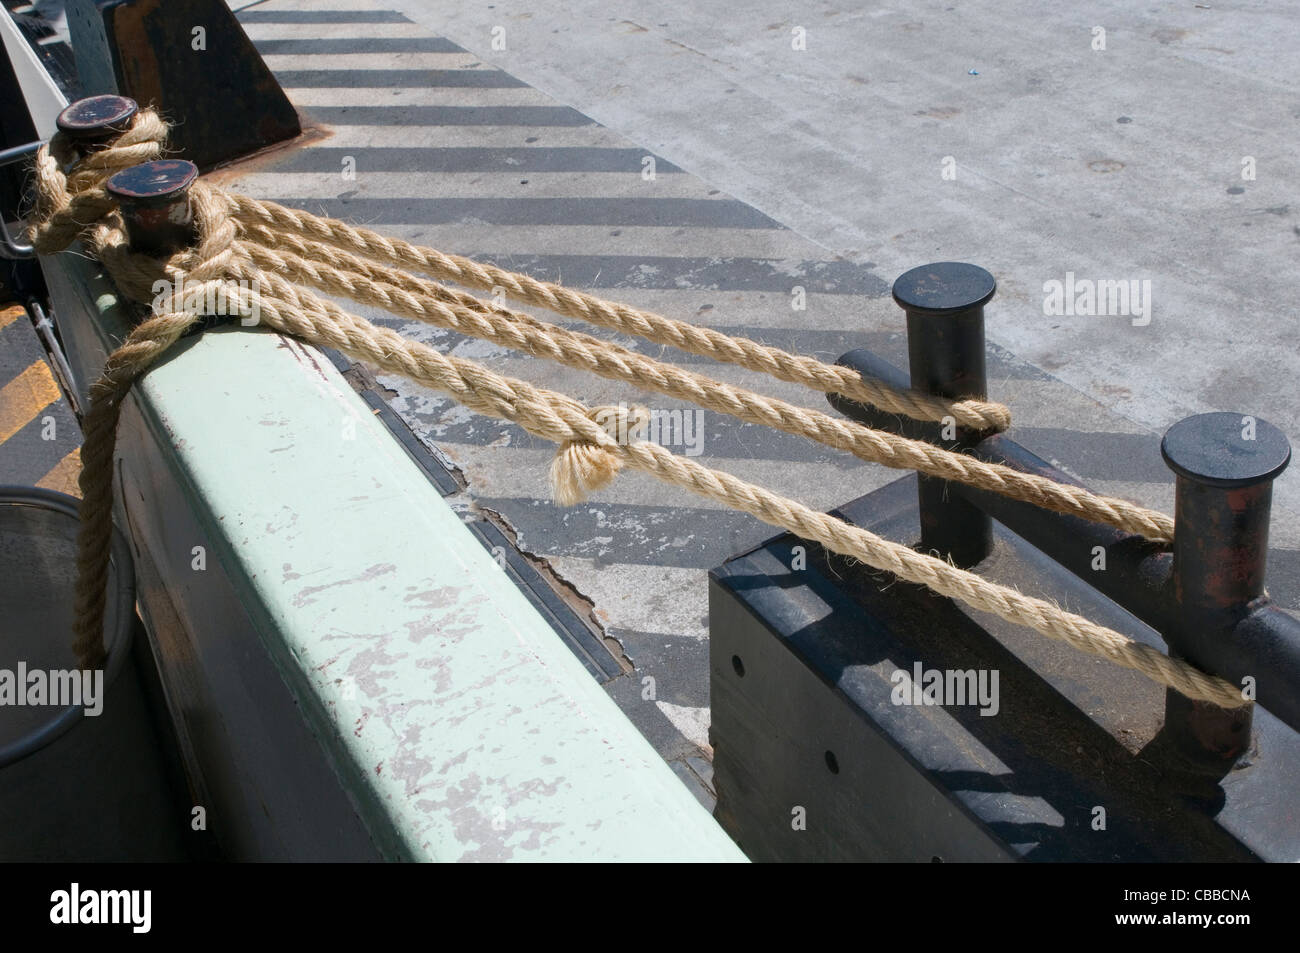 rope ropes under tension stress strain force forces acting on dock boat mooring moored Stock Photo